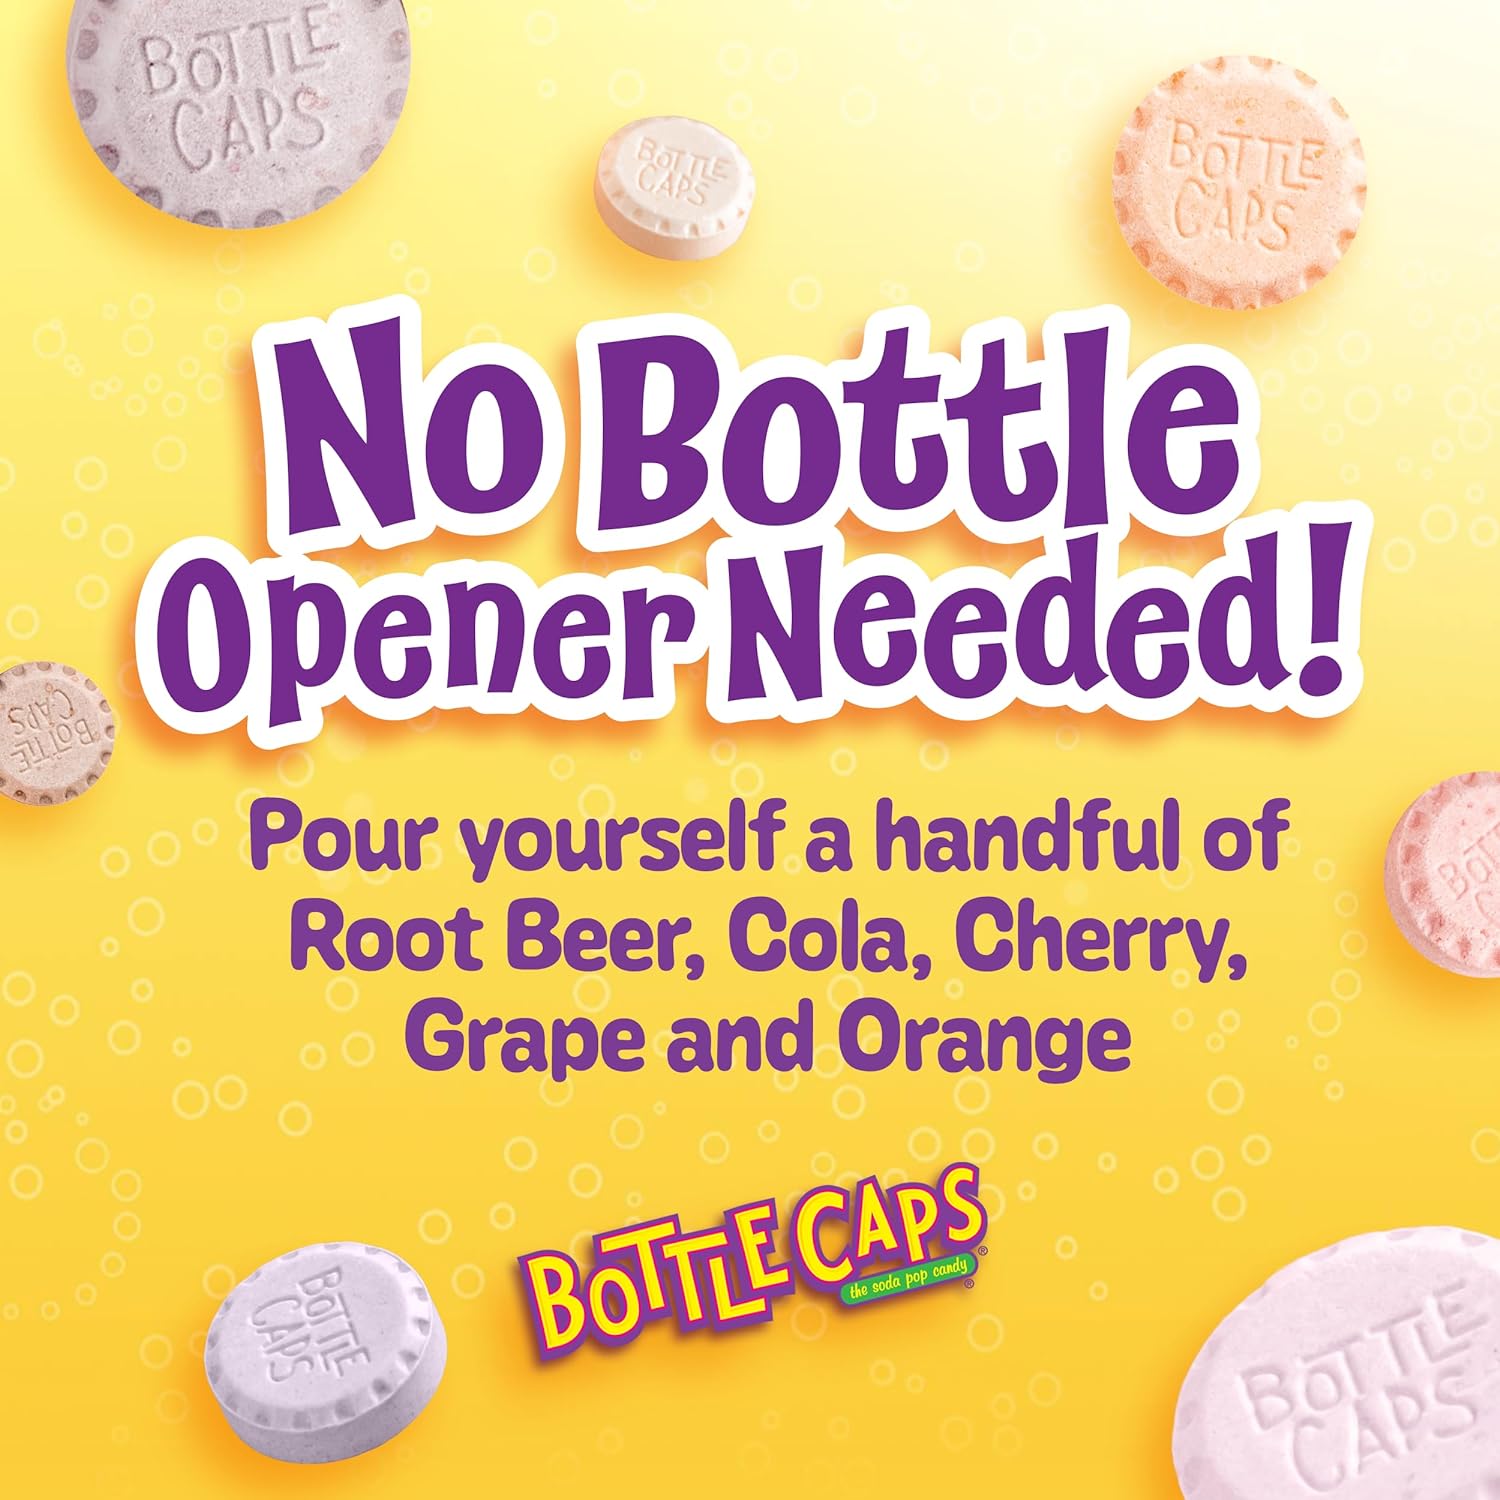 Wonka Bottle Caps, Fizzy Hard Candy, 5 Ounce Theater Candy Boxes (Pack of 10)